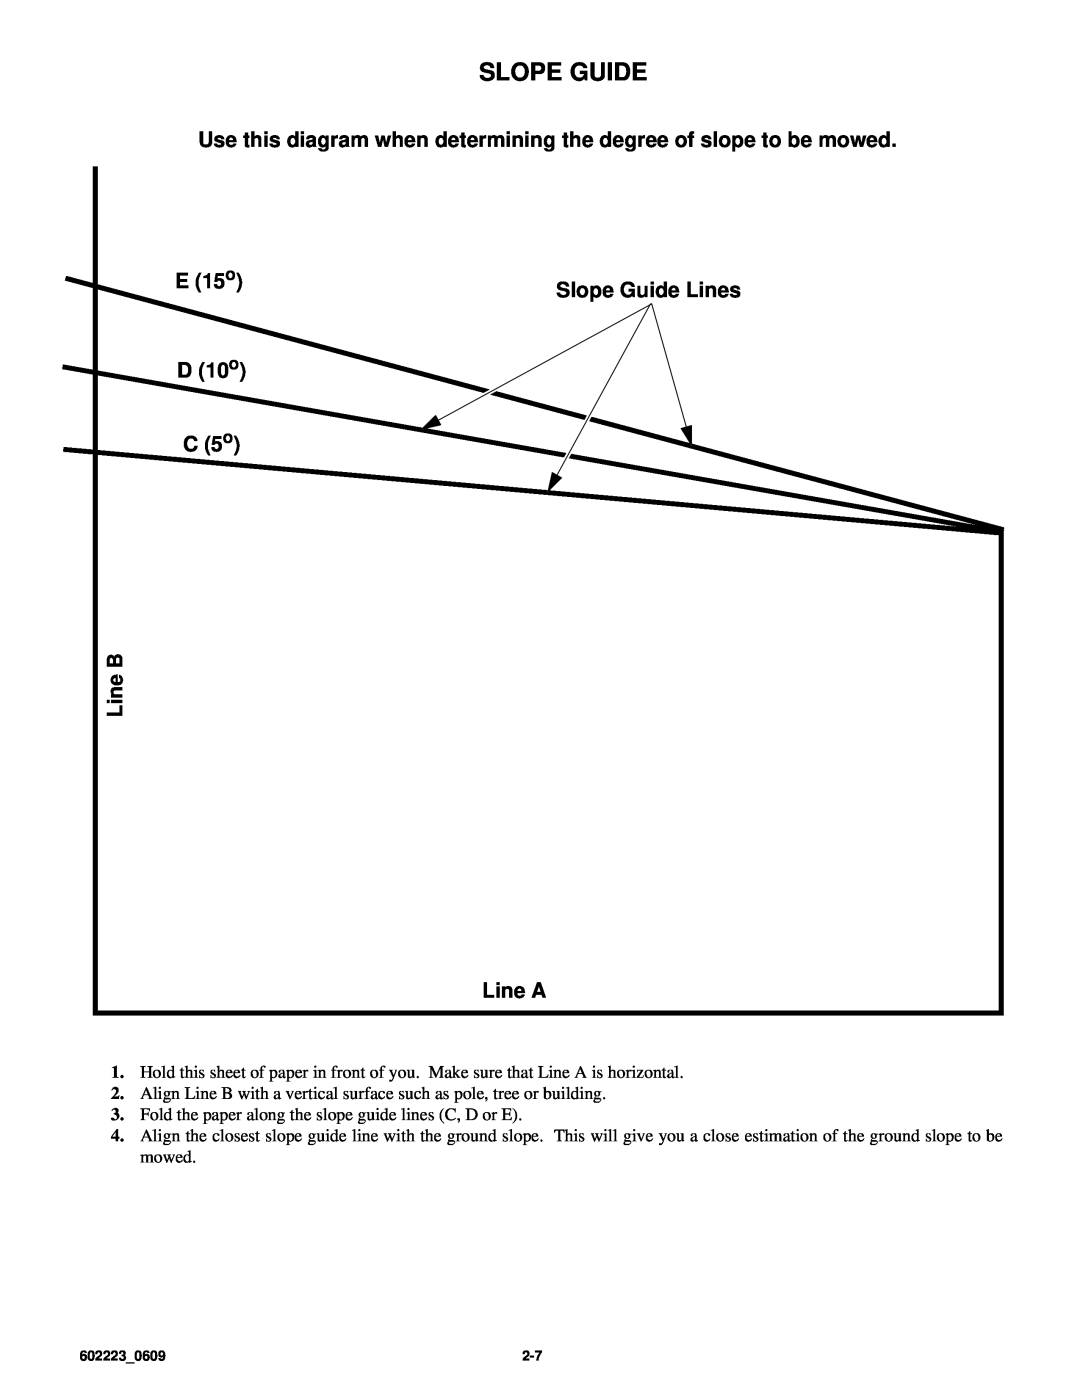 Hustler Turf Z4 manual Use this diagram when determining the degree of slope to be mowed, E 15 o, Slope Guide Lines 